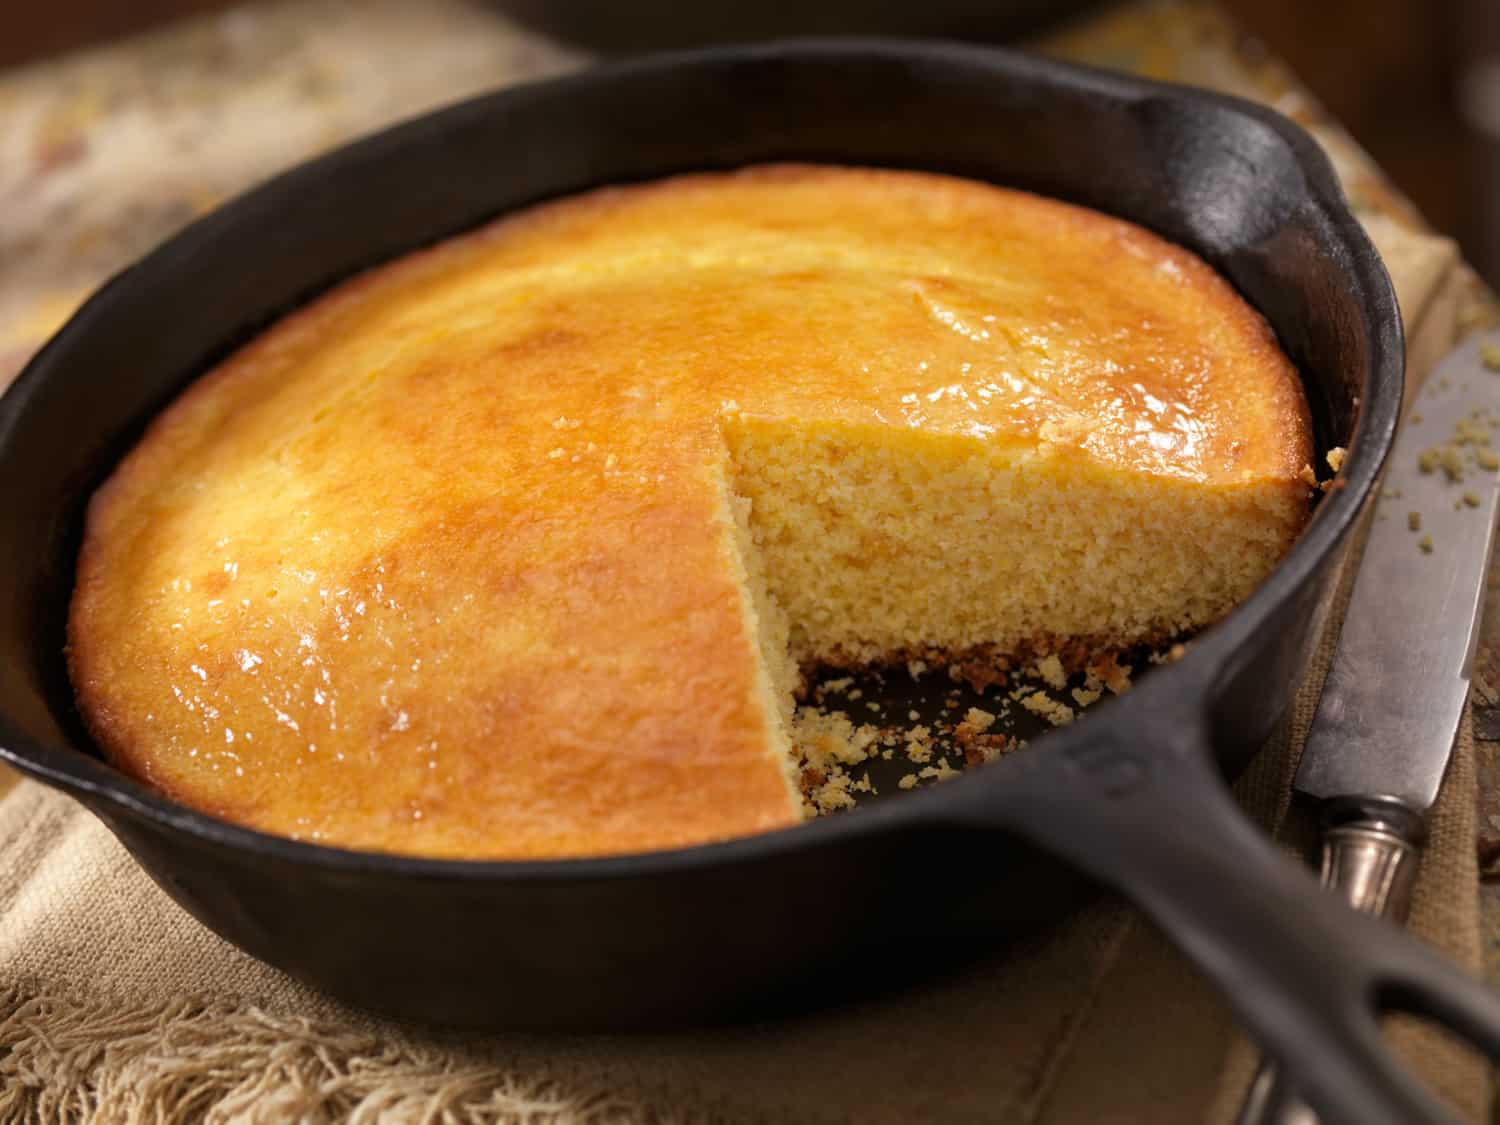 Corn Bread in a Cast Iron Skillet with a Pot of Baked Beans-Photographed on Hasselblad H3D2-39mb Camera